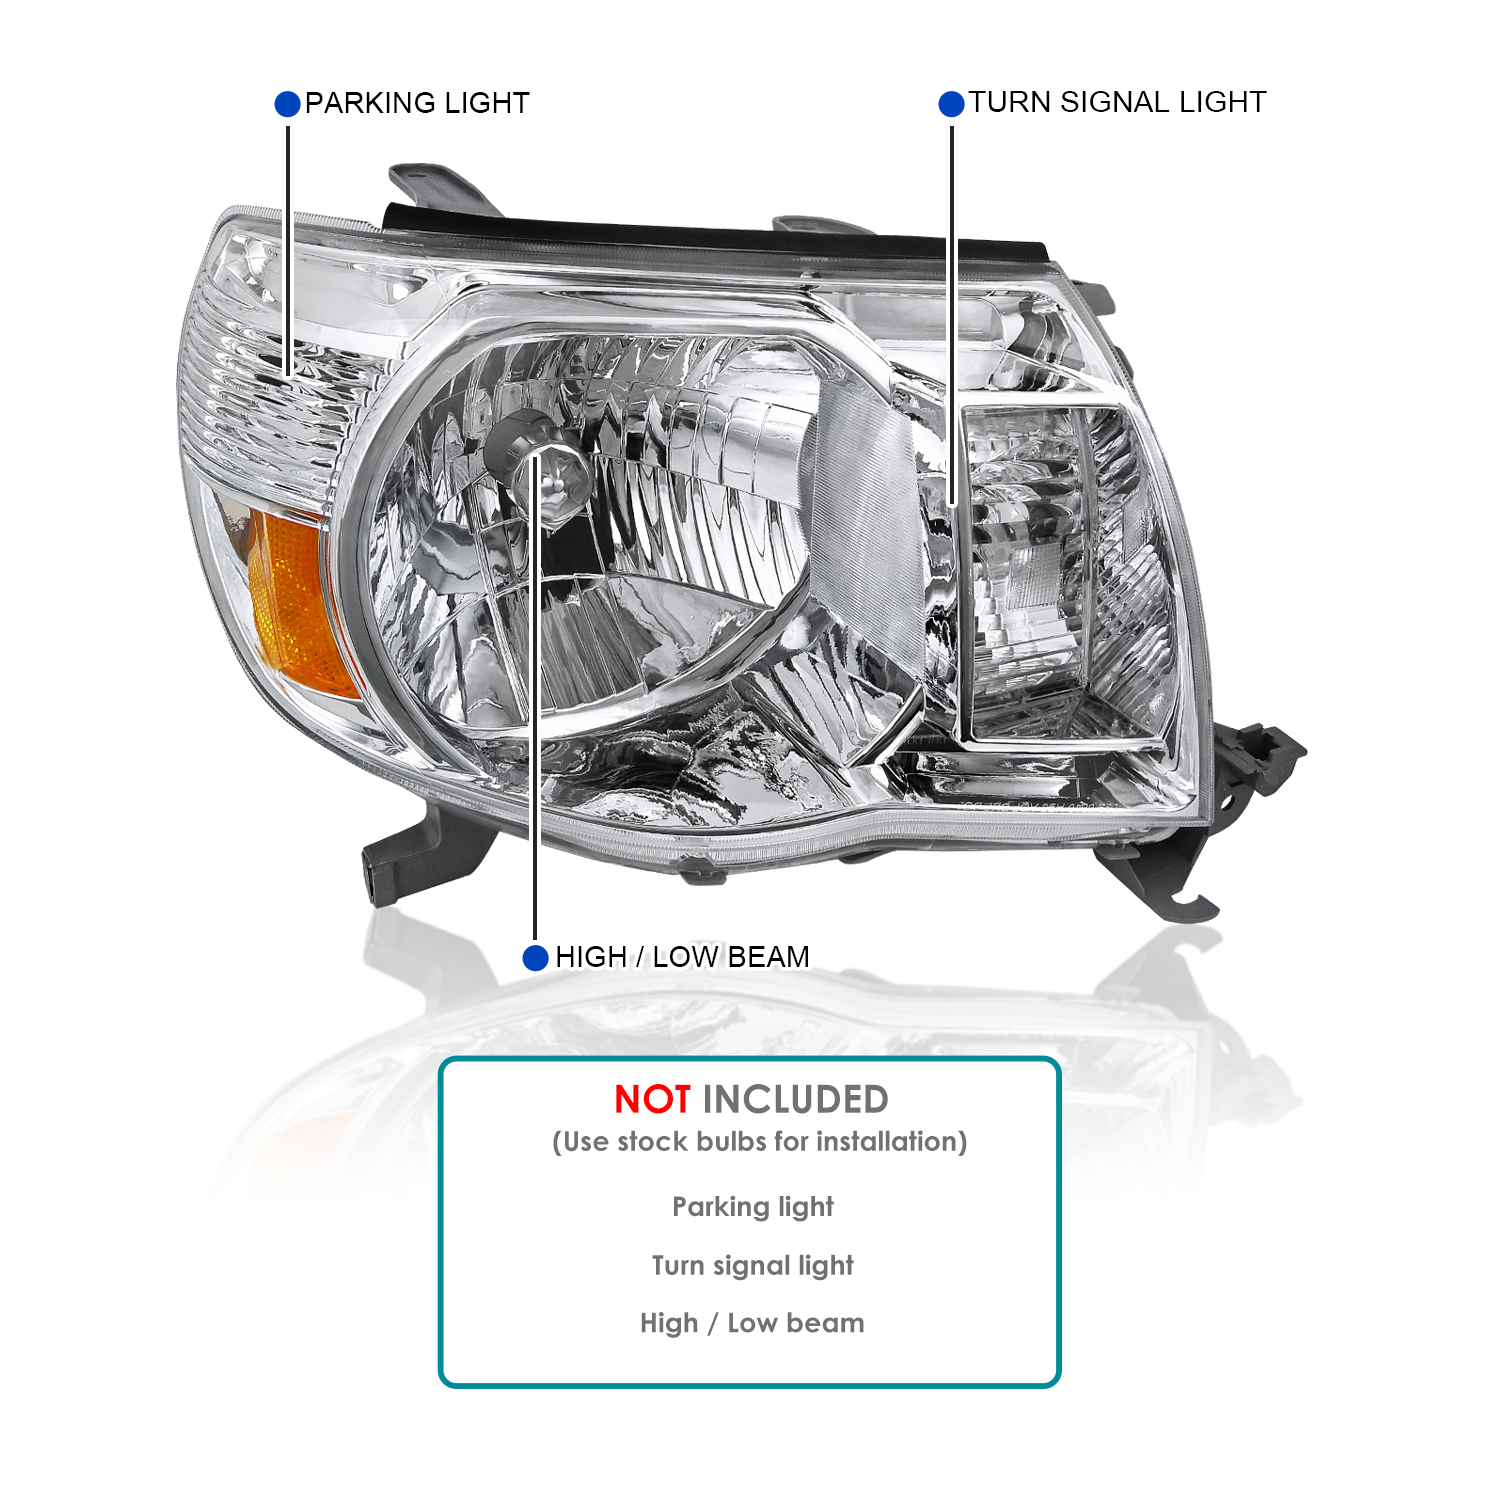 Spec-D Tuning Chrome Housing Clear Lens Headlights Compatible with 2005-2011 Toyota Tacoma L+R Pair Head Light Lamp Assembly - image 3 of 6